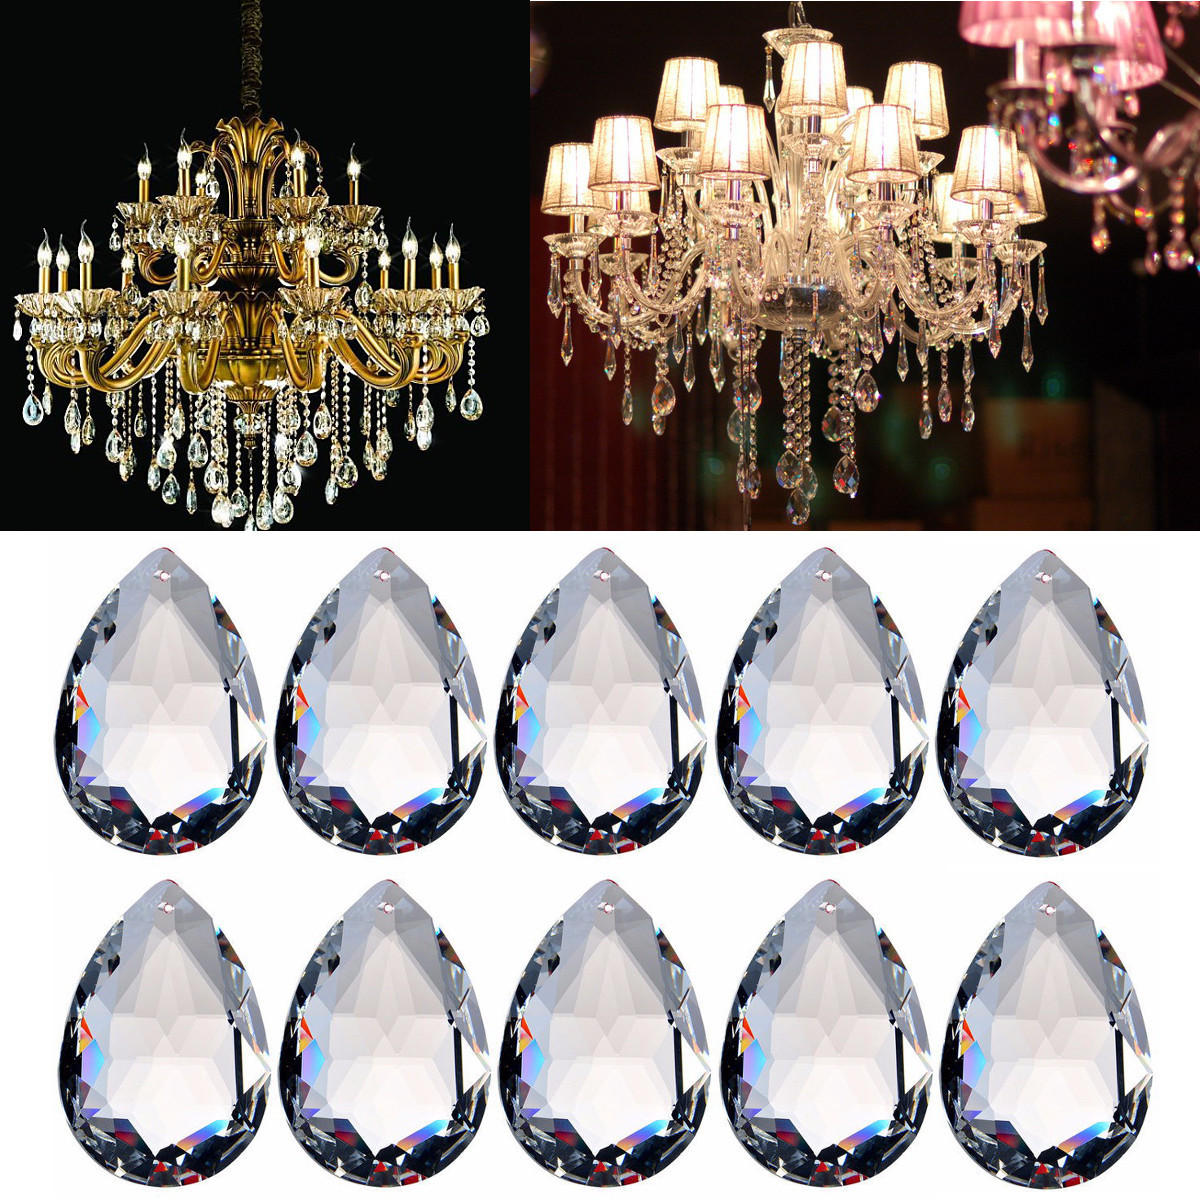 10 Clear Teardrop Chandelier Glass Hanging Replacement Crystals Prisms Drops